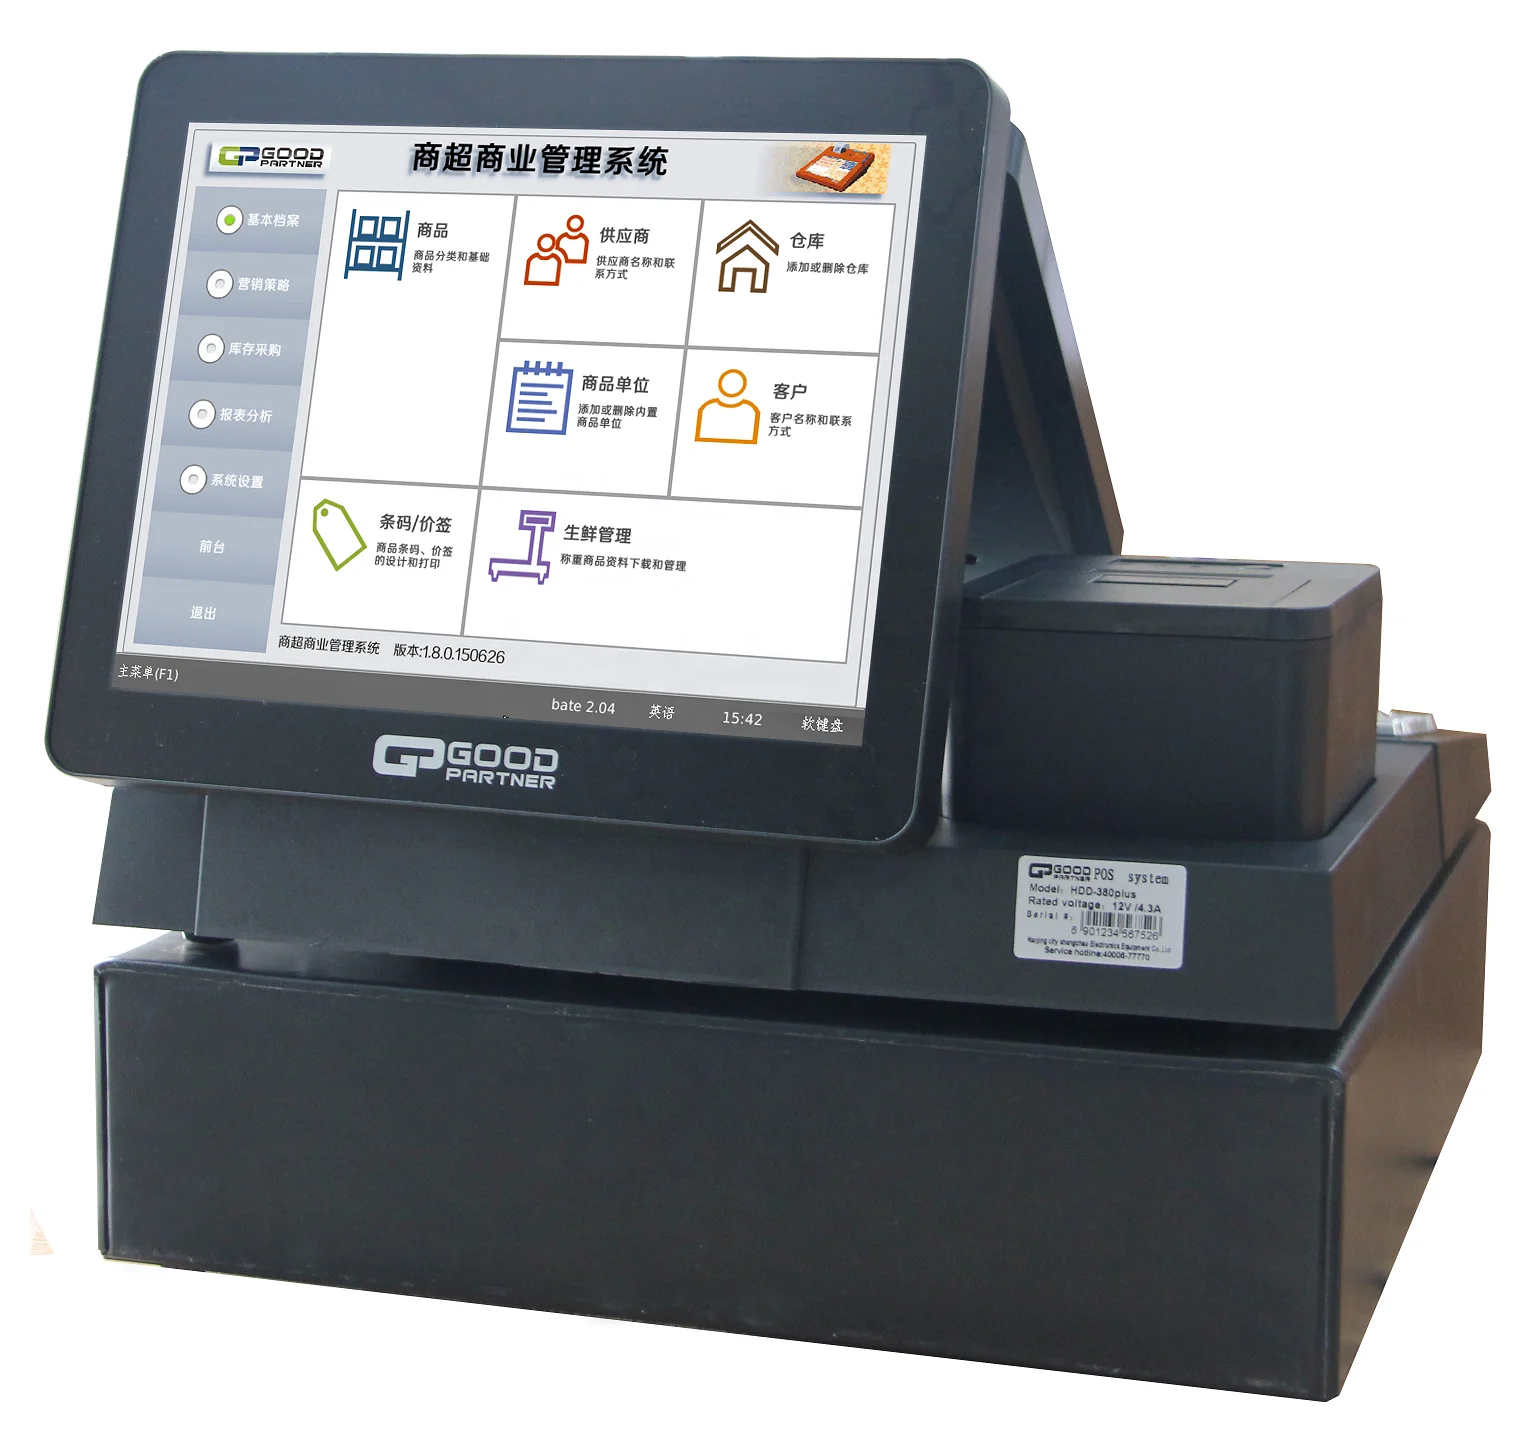 

Touch screen and Android/Linux/Win all in one POS machine with Android/Linux/Win OS and Hard Disk Capacity windows32/64/128GB